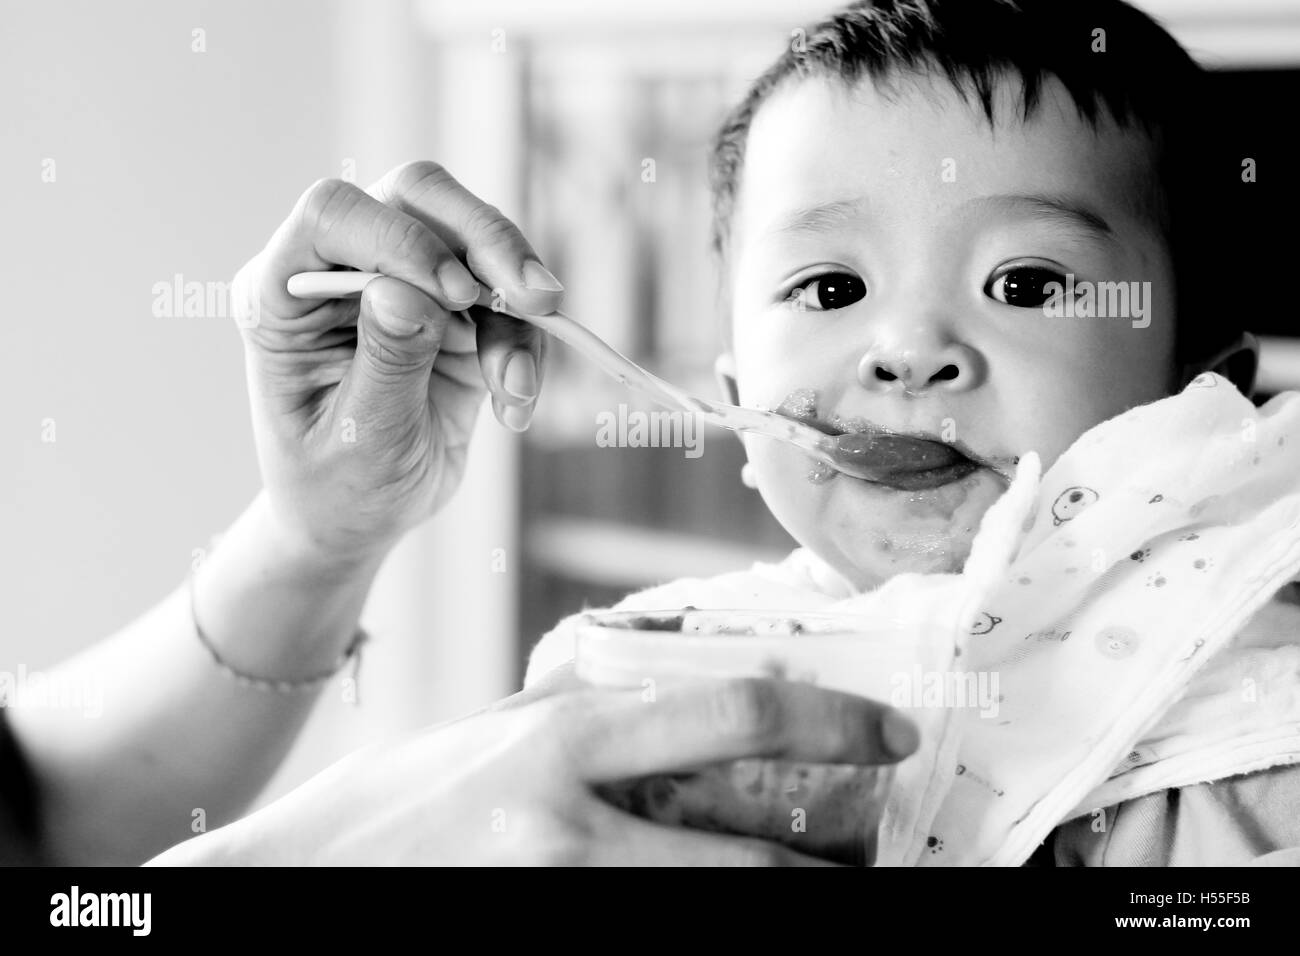 baby looking while feeding Eating Healthy Porridge Food, soft black and white color low key style. Stock Photo